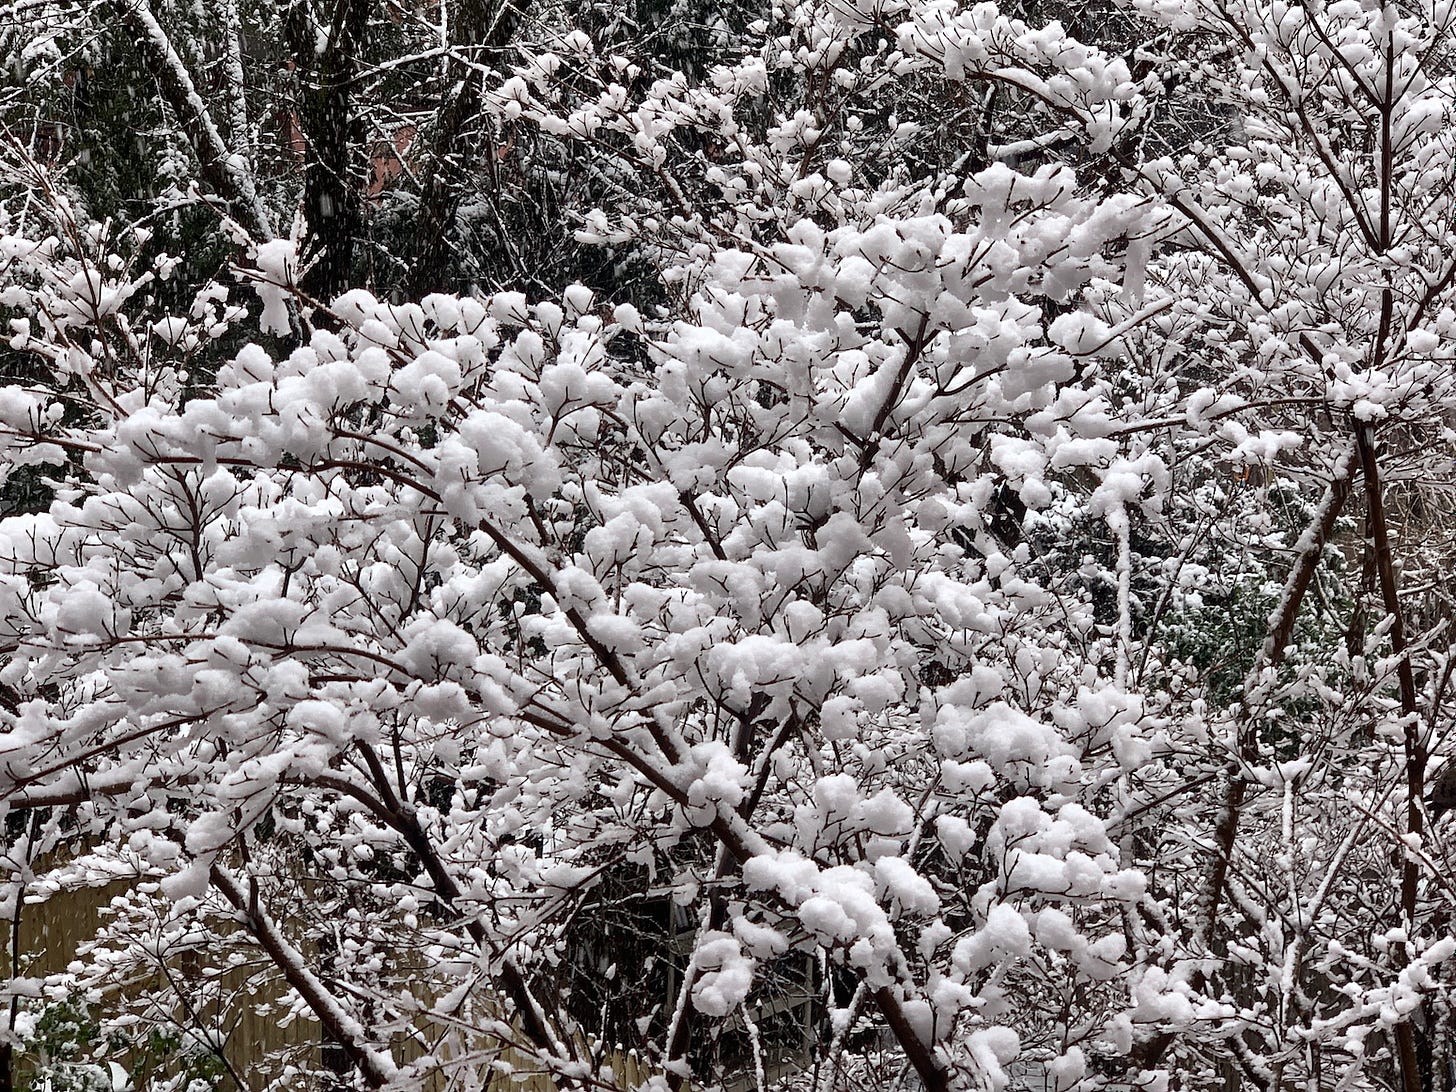 A lovely image of fluffy snow atop tree branches